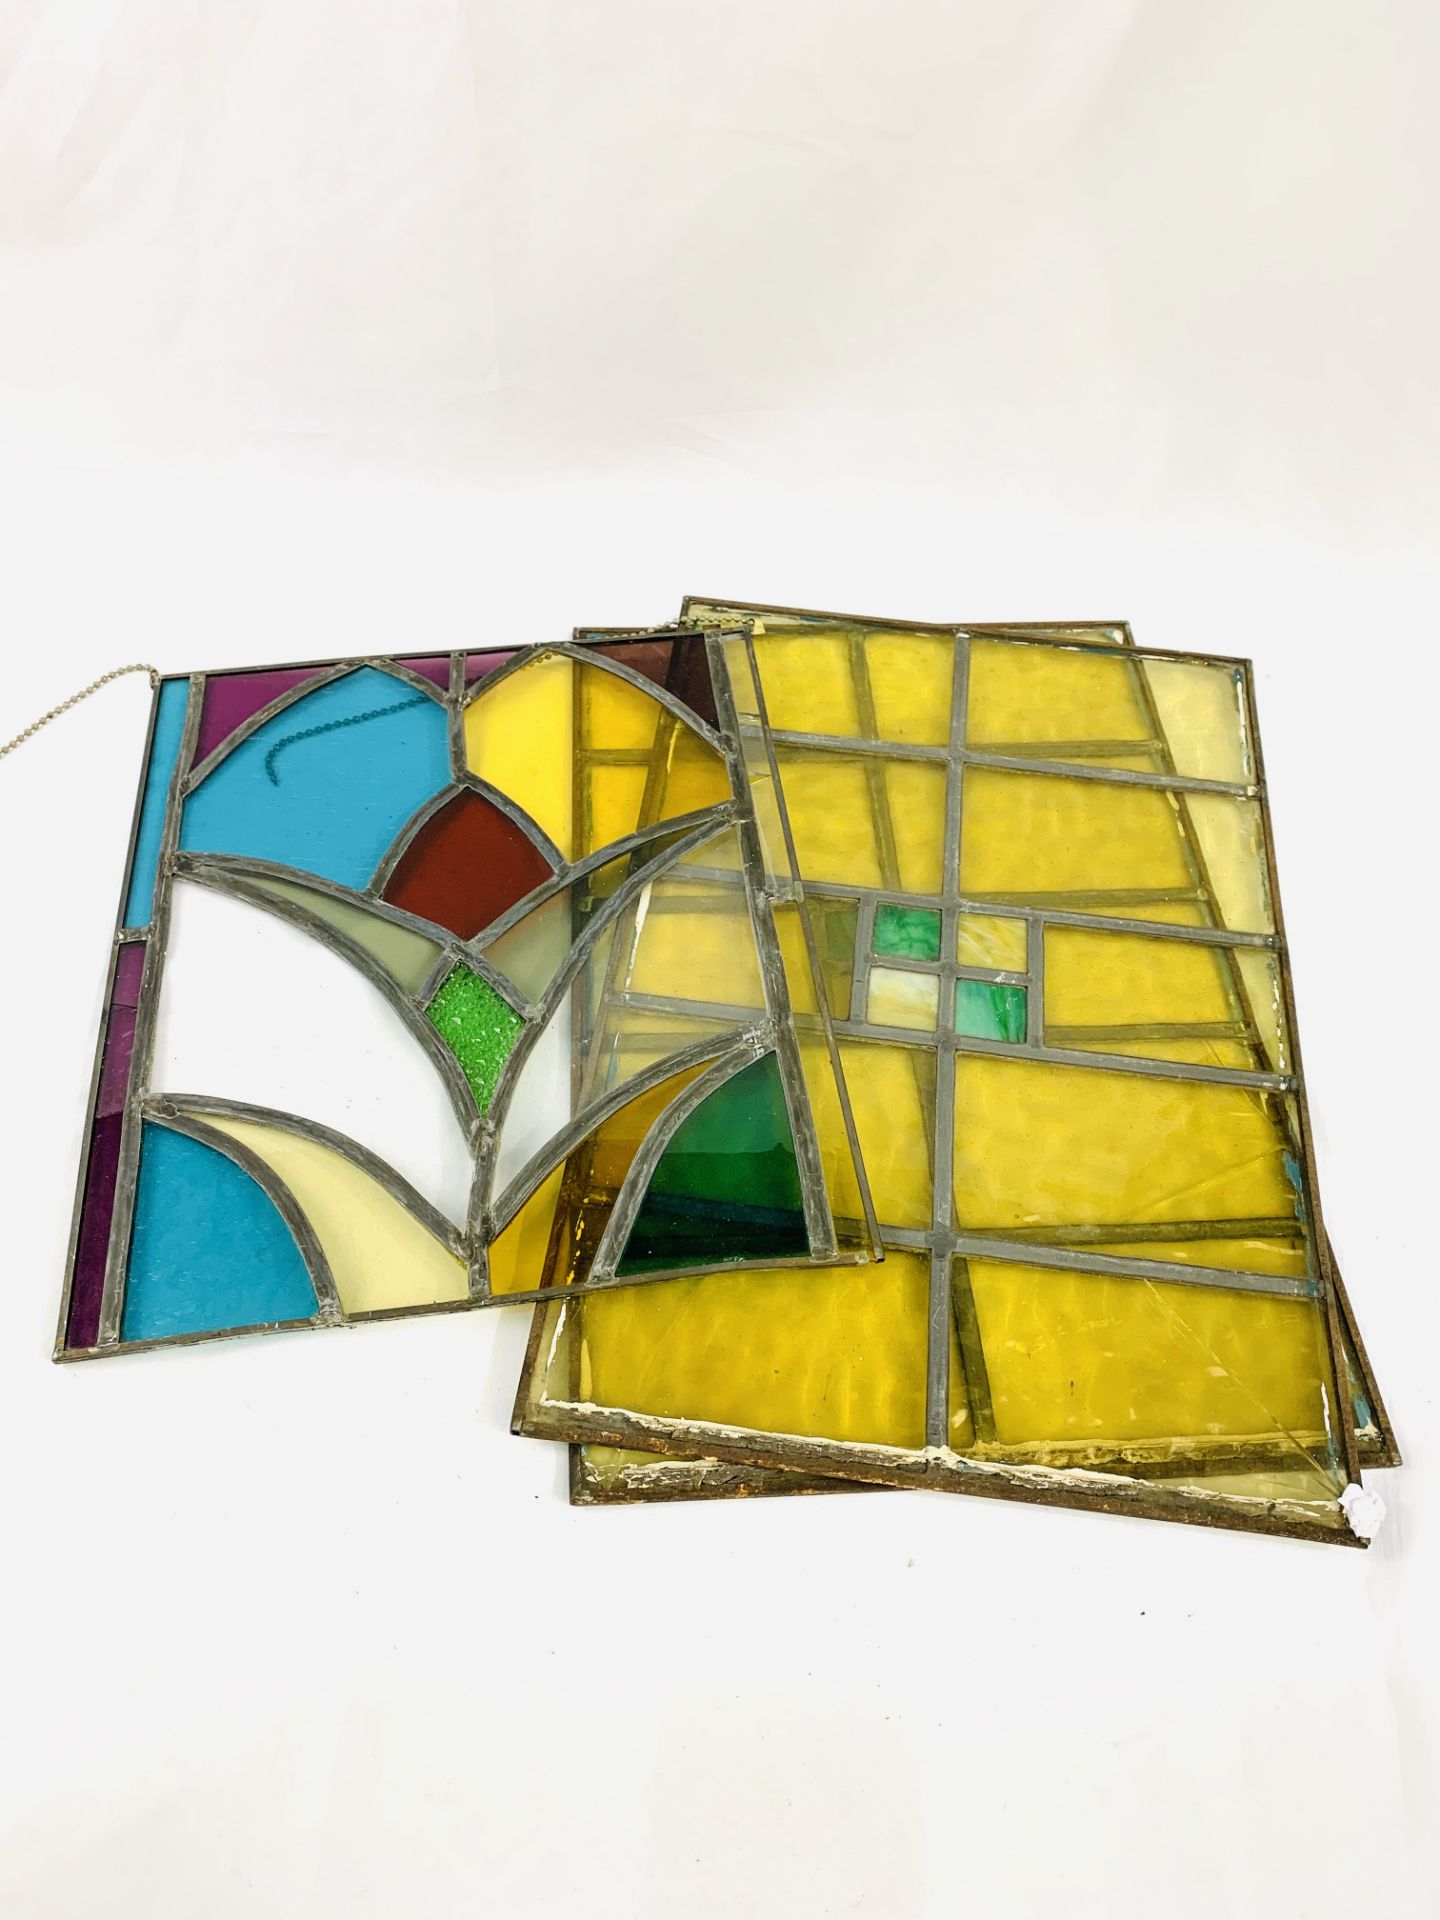 3 Antique stained glass window panels.